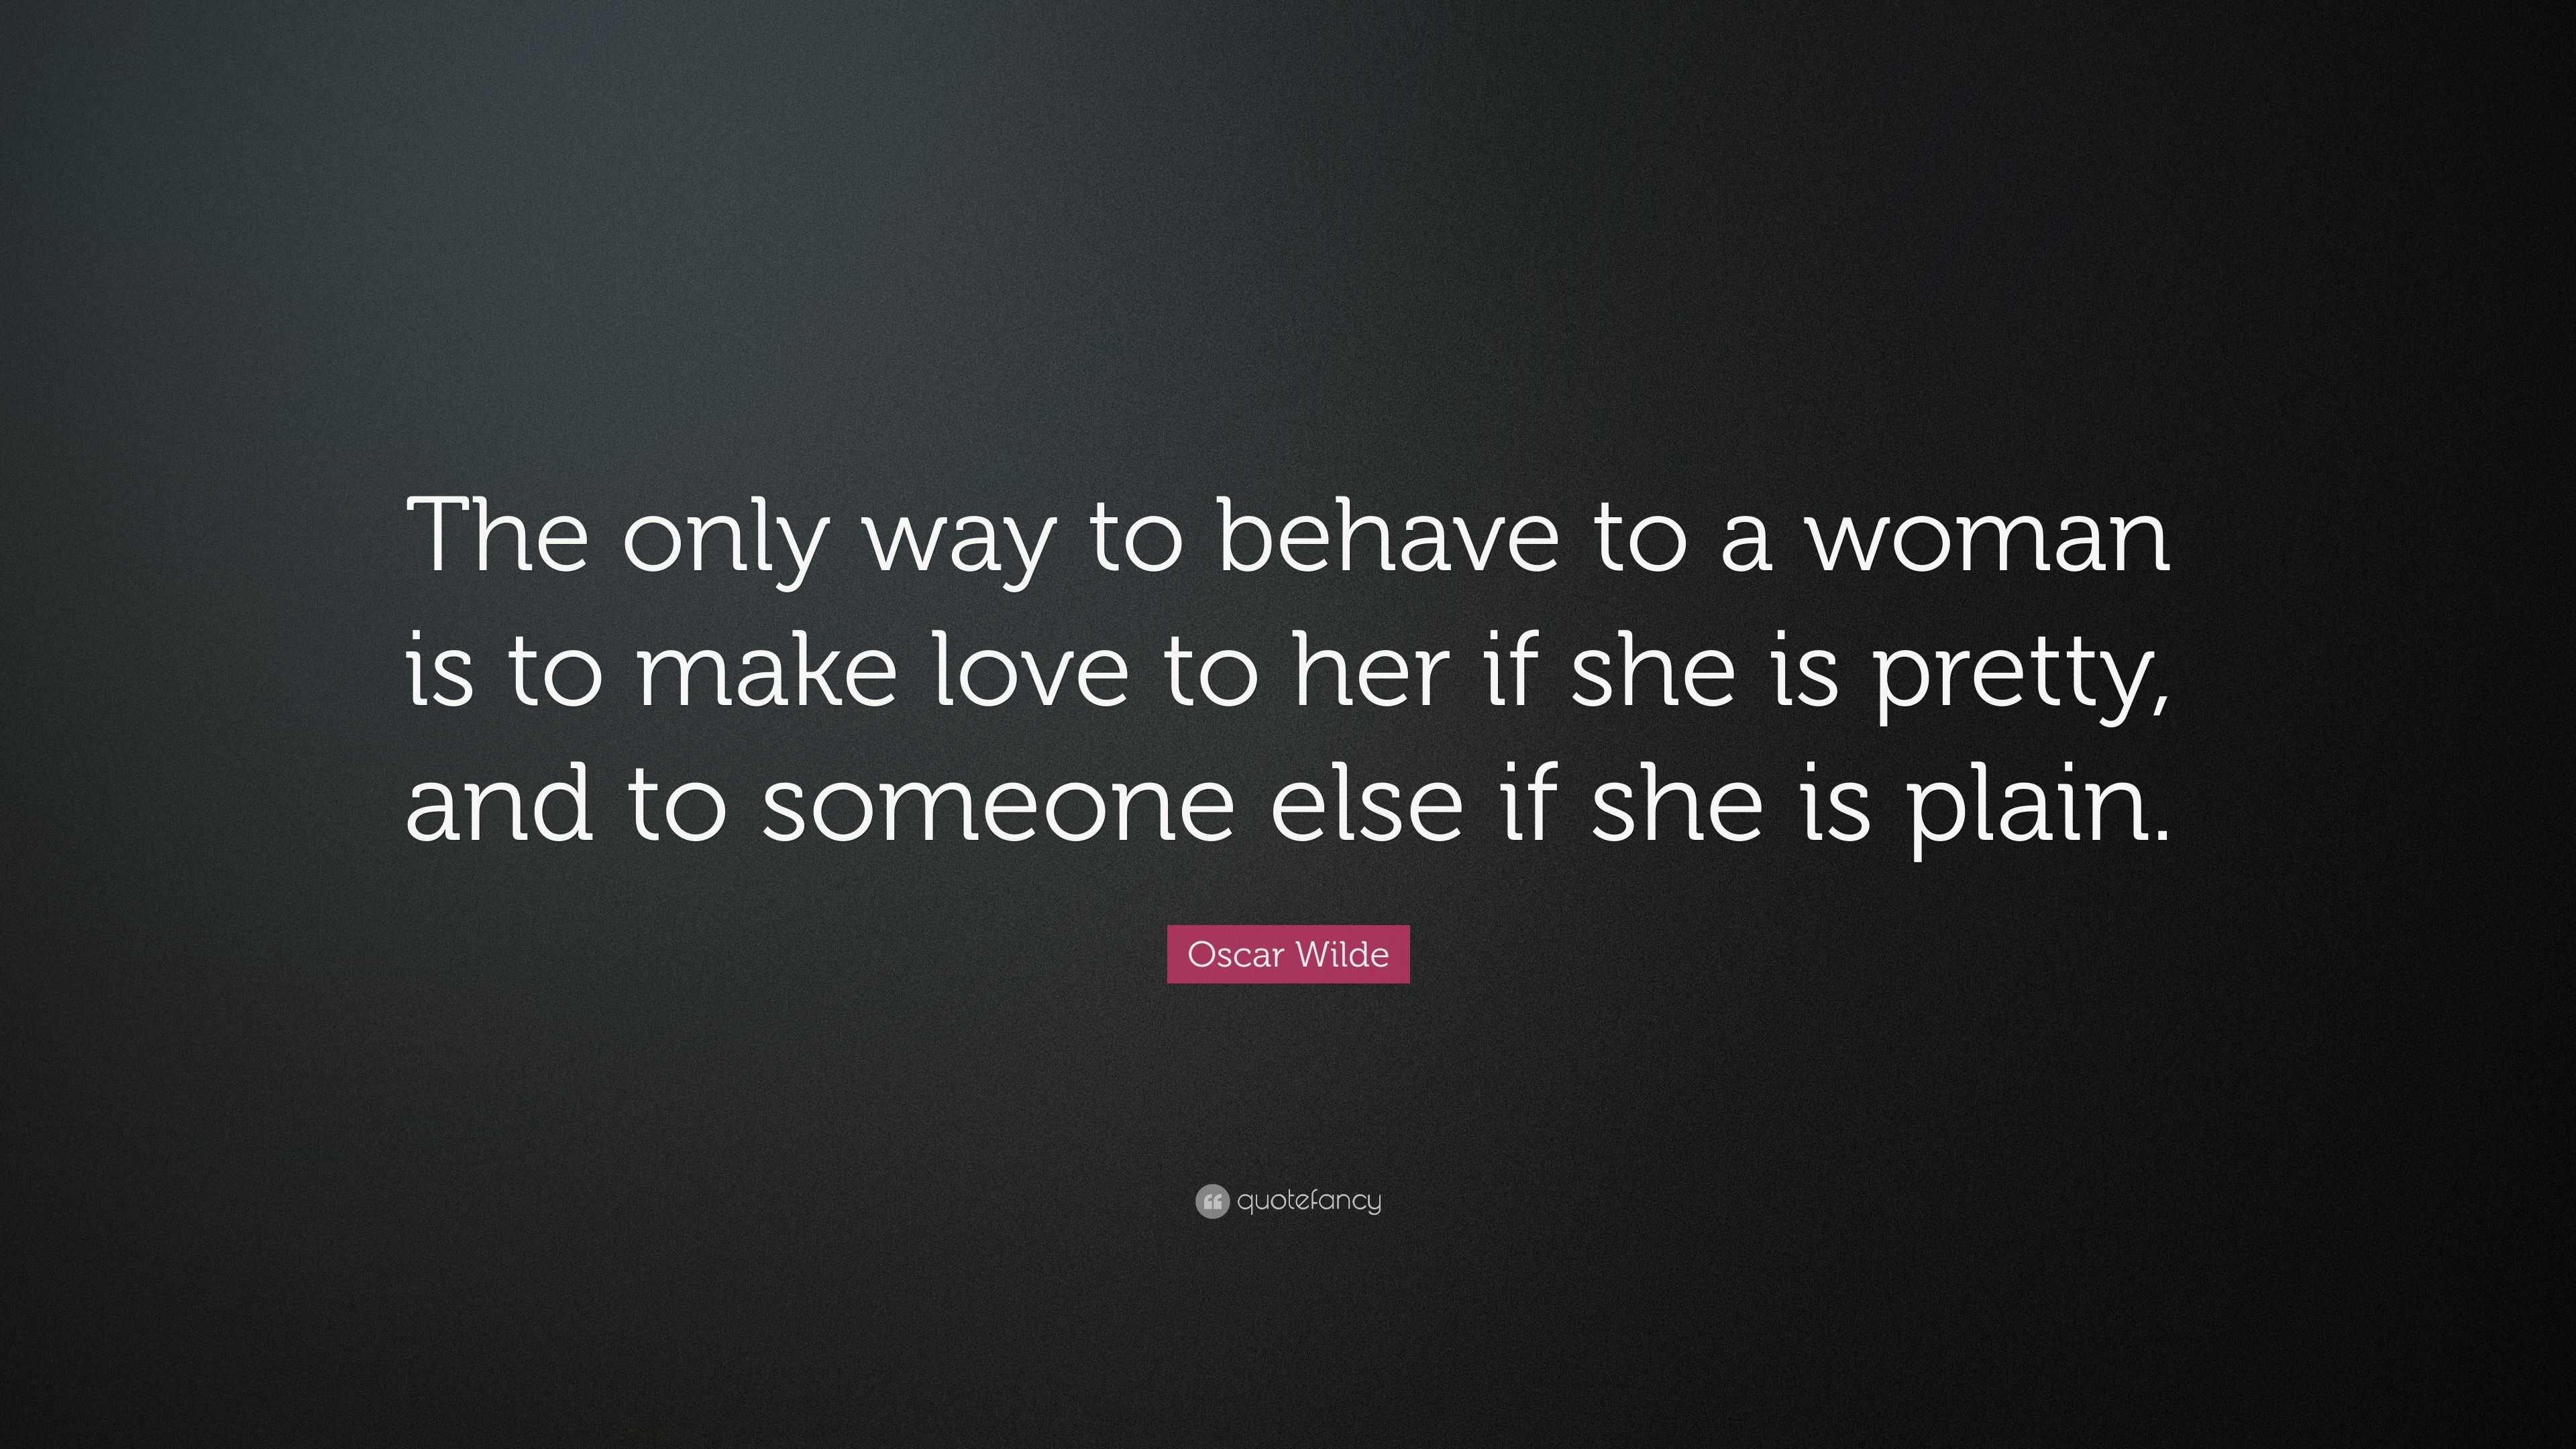 Oscar Wilde Quote “The only way to behave to a woman is to make